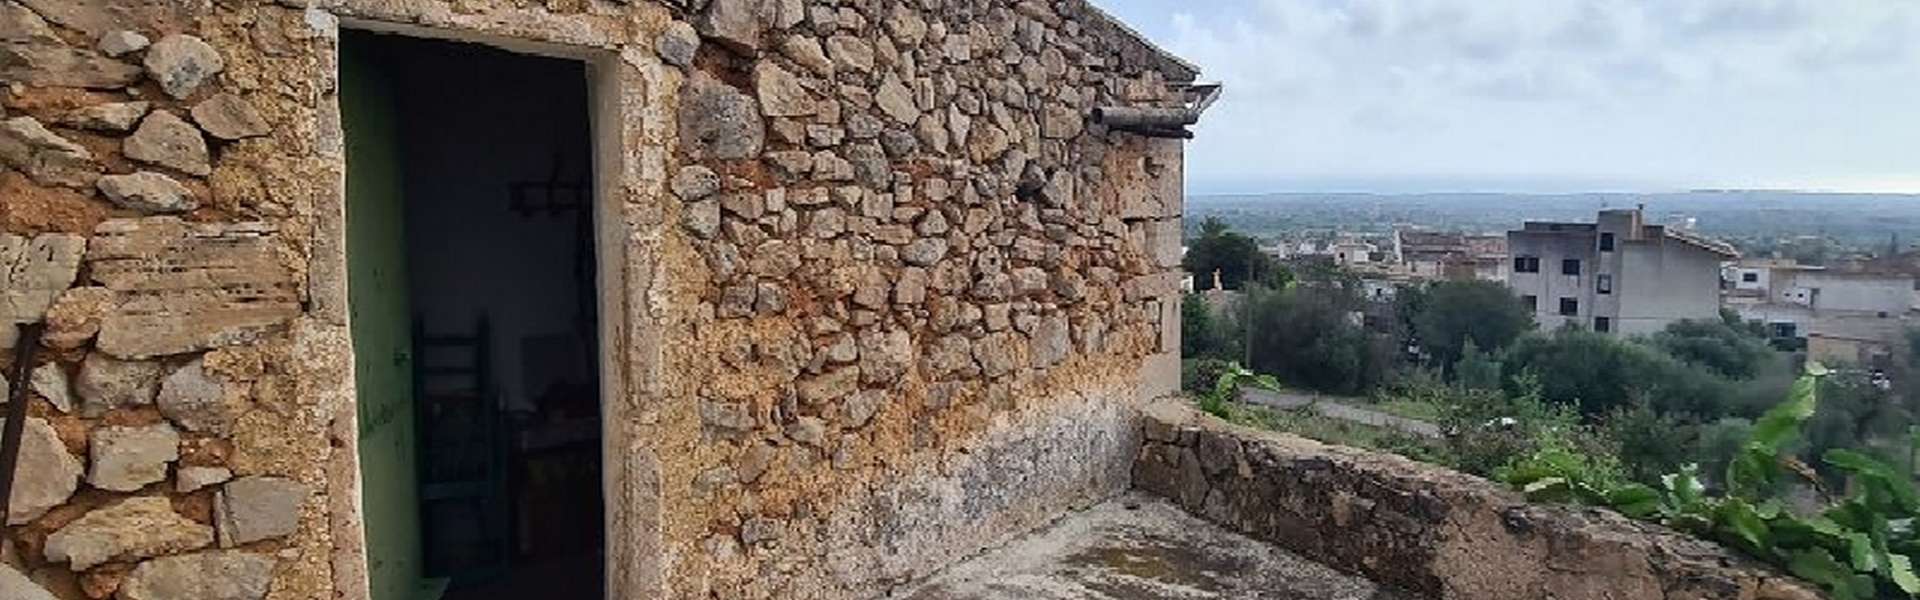 S'Horta - Finca in need of renovation with panoramic views